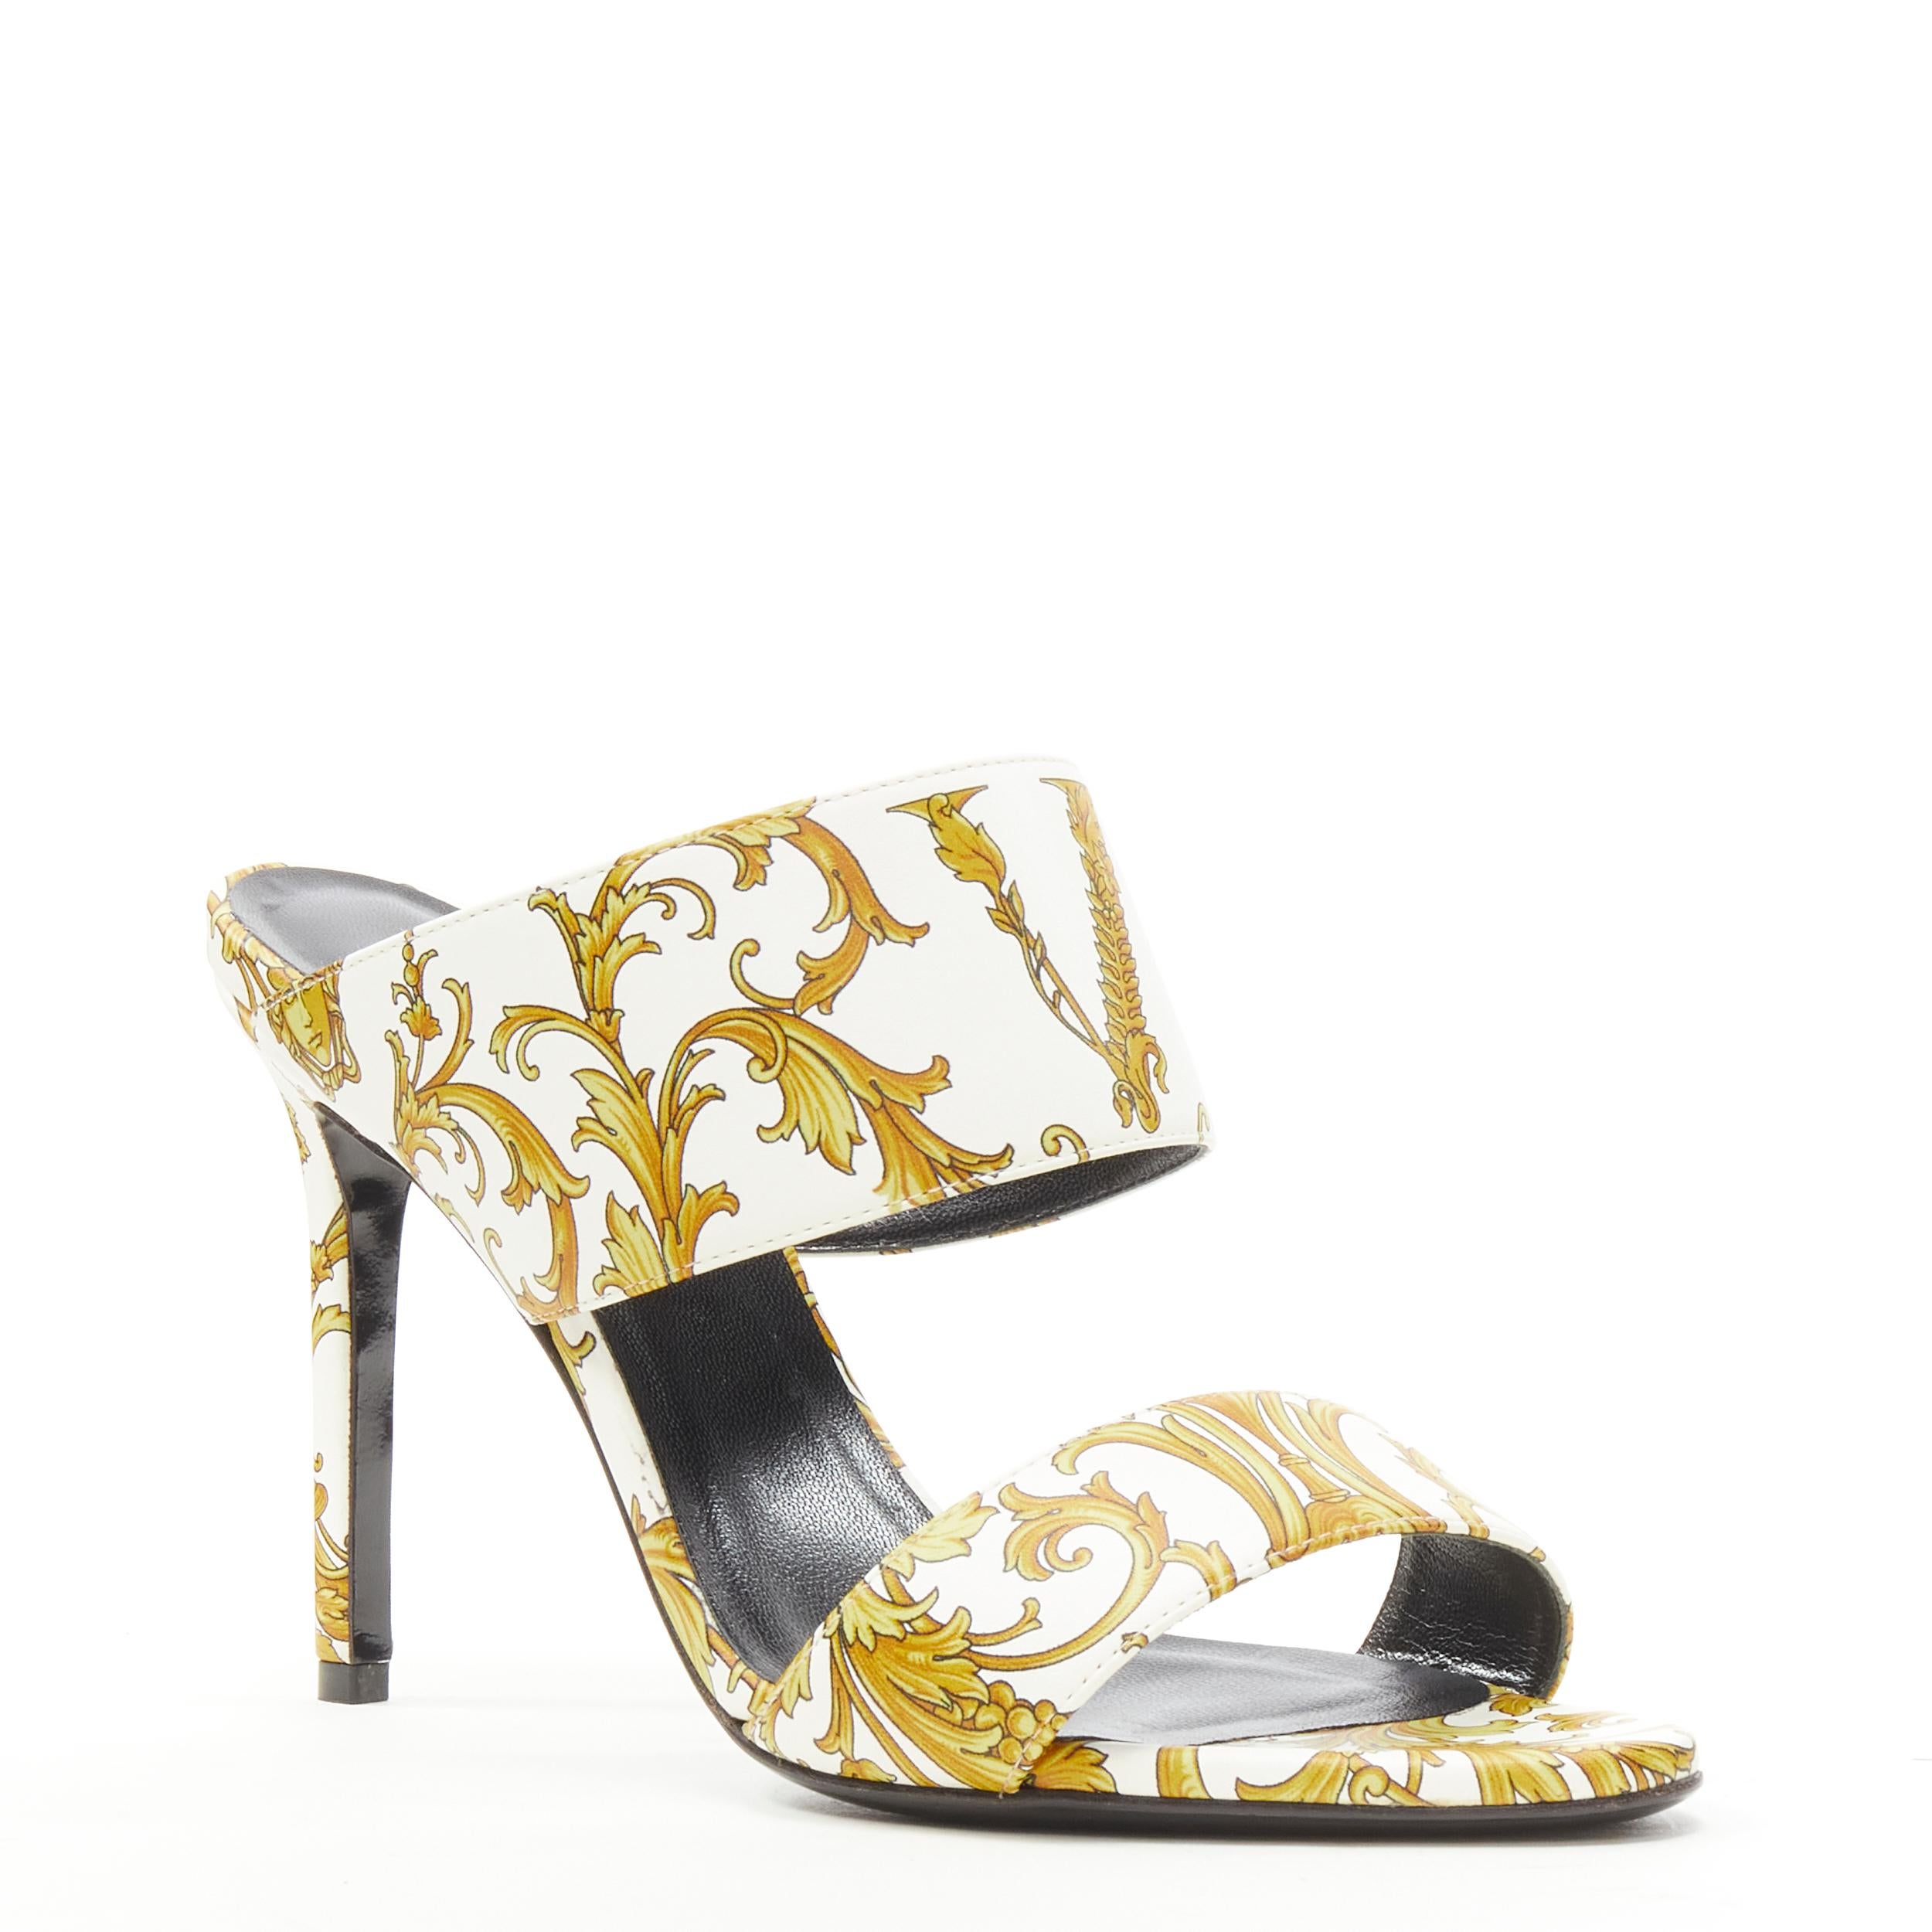 new VERSACE Virtus Barocco white gold print strappy mule heel EU38 
Reference: TGAS/C00054 
Brand: Versace 
Designer: Donatella Versace 
Collection: Virtus Barocco 
Material: Leather 
Color: White 
Pattern: Floral 
Extra Detail: Genuine leather.